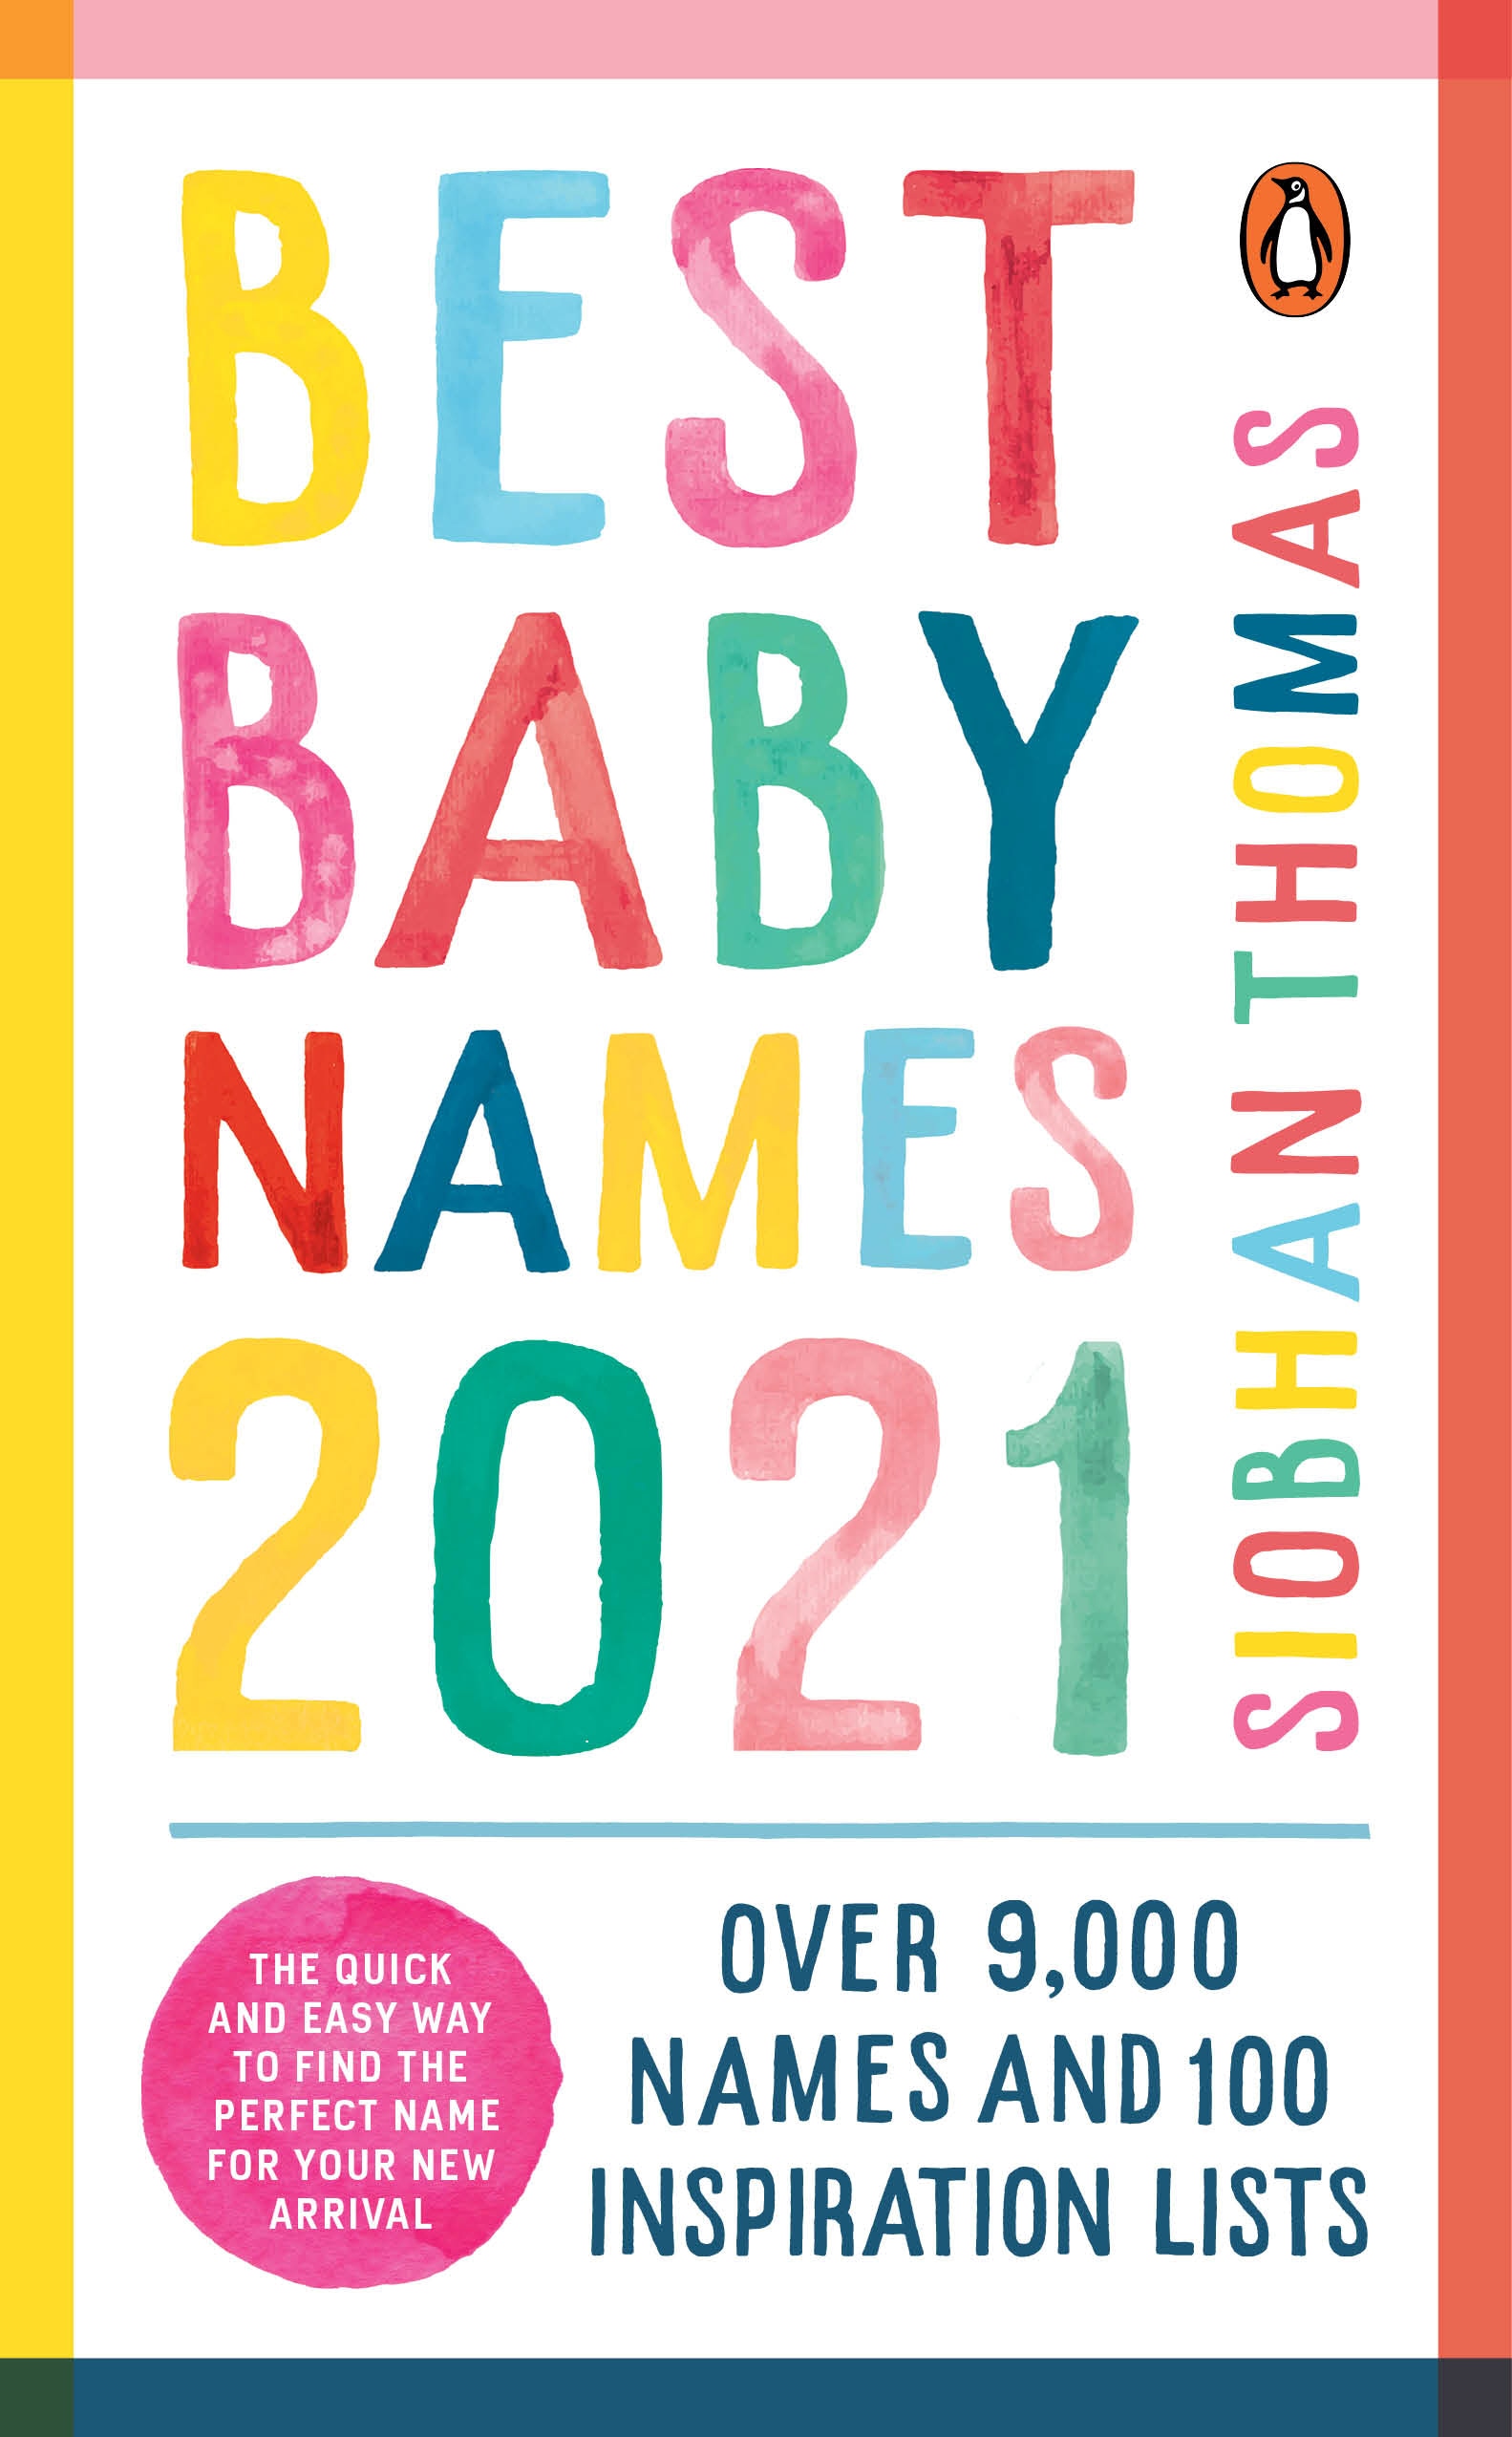 Book “Best Baby Names 2021” by Siobhan Thomas — August 6, 2020